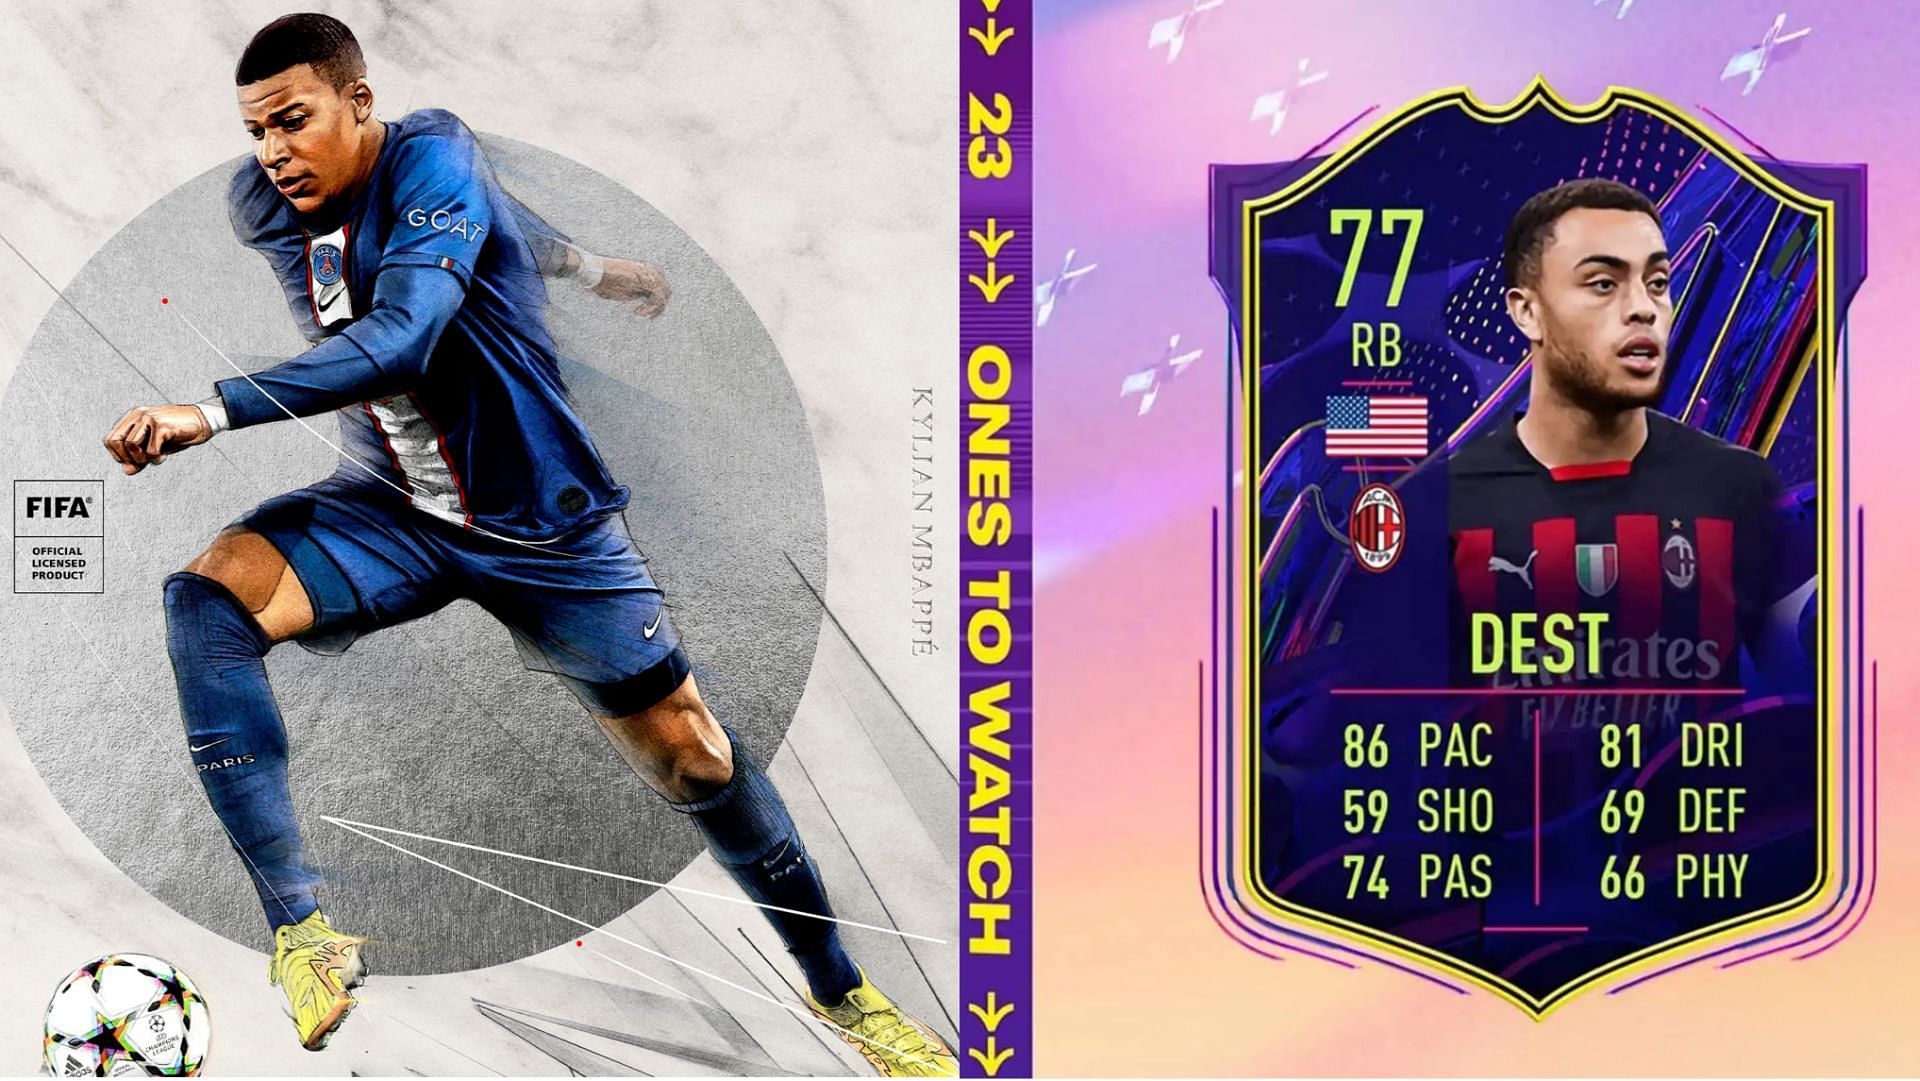 FIFA 23 OTW: How do Ones to Watch upgrades work Ultimate Team?